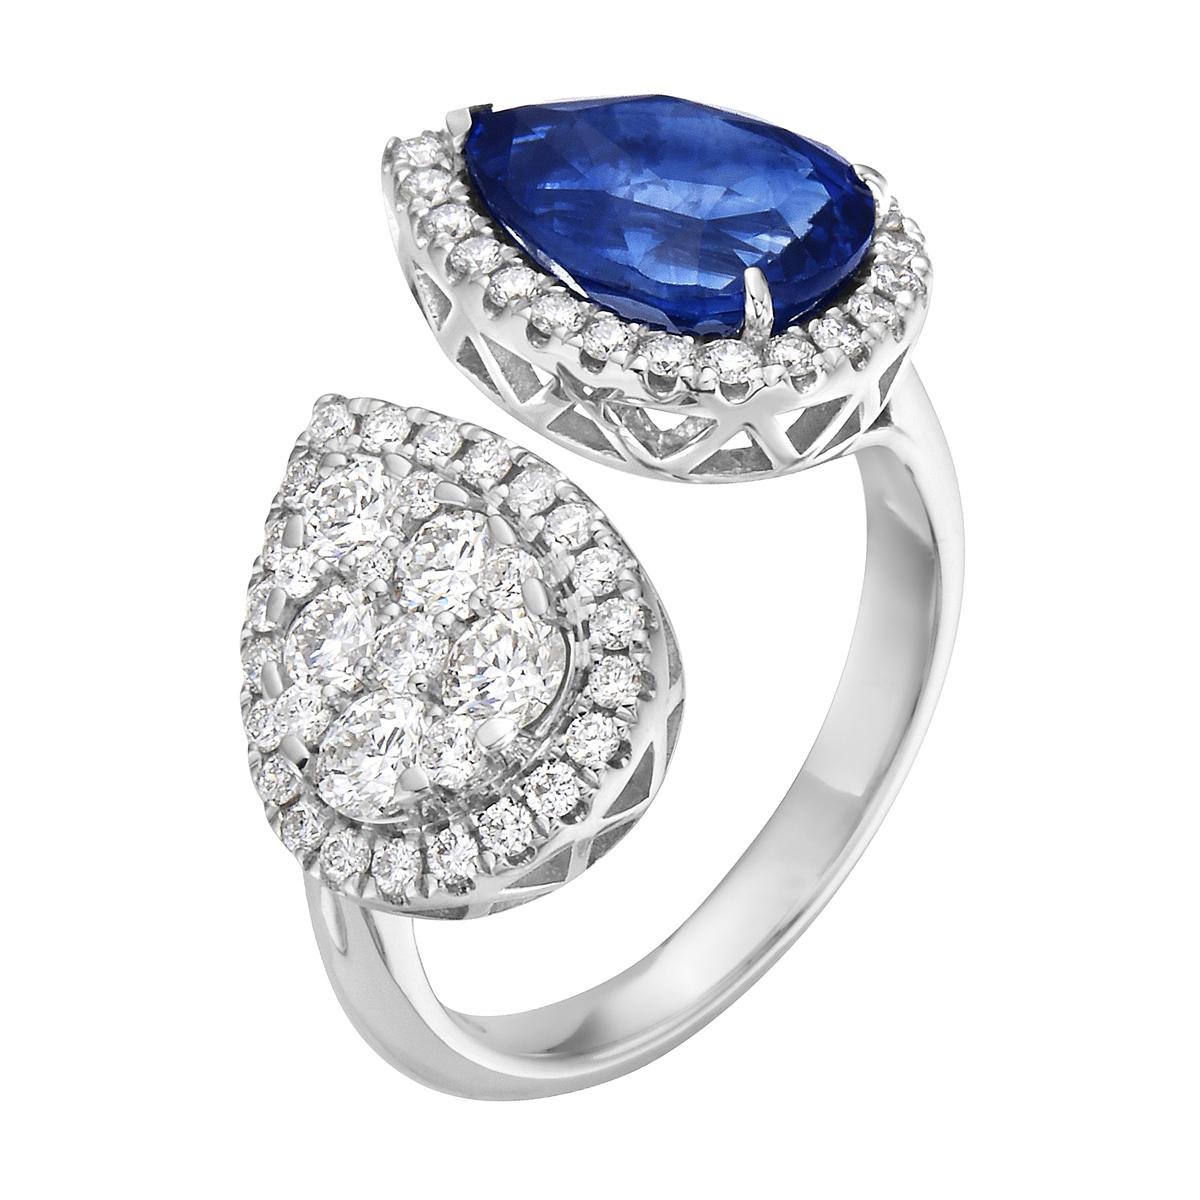 With this exquisite diamond and sapphire ring, style and glamour are in the spotlight. This 18-karat diamond and sapphire ring is made from 6.9 grams of gold. This ring is adorned with VS2, G color diamonds, made out of 56 diamonds totaling 1.08